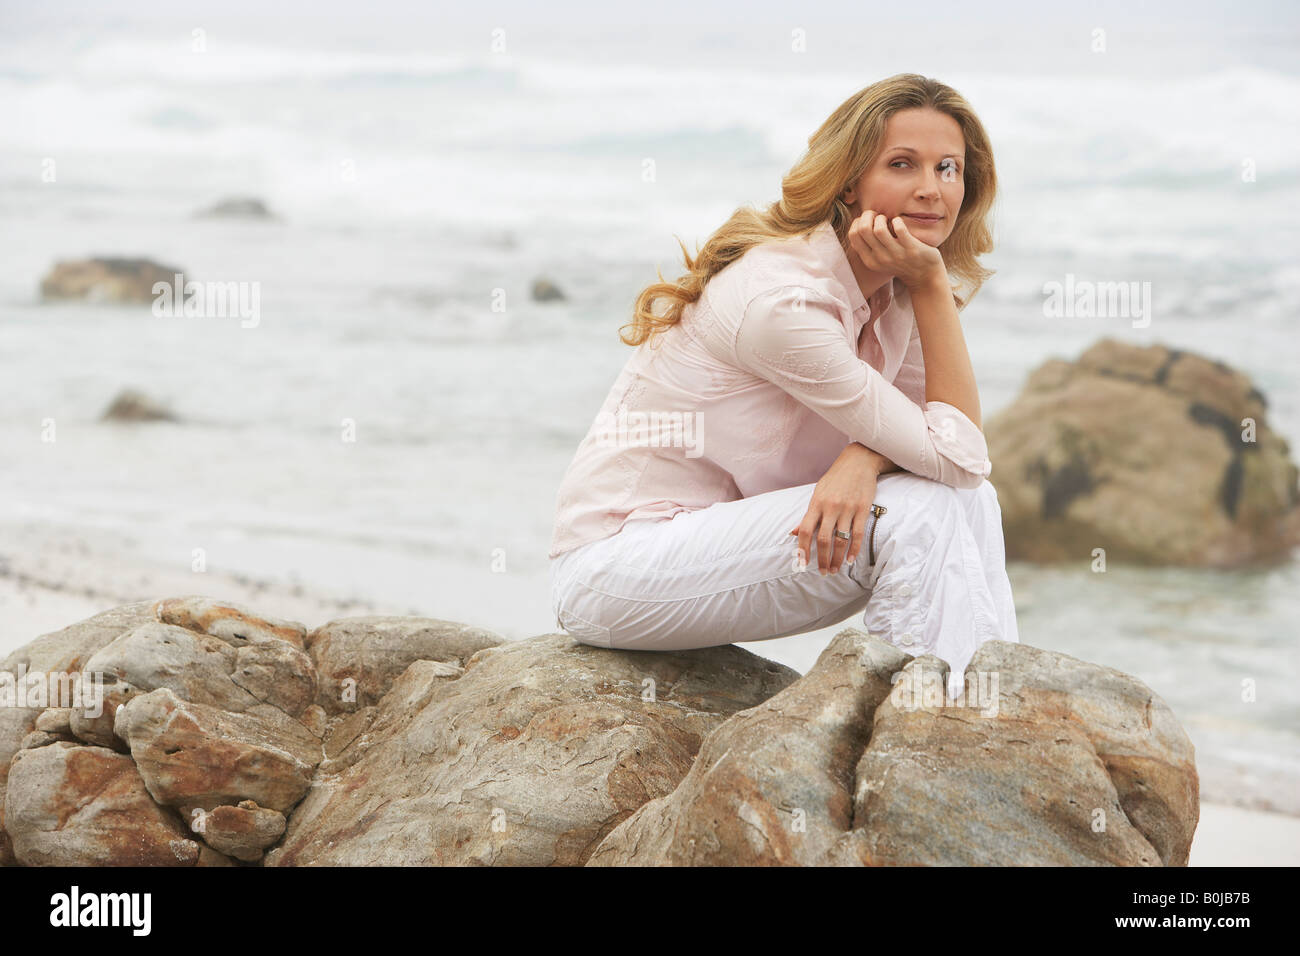 Woman Relaxing on Beach Banque D'Images